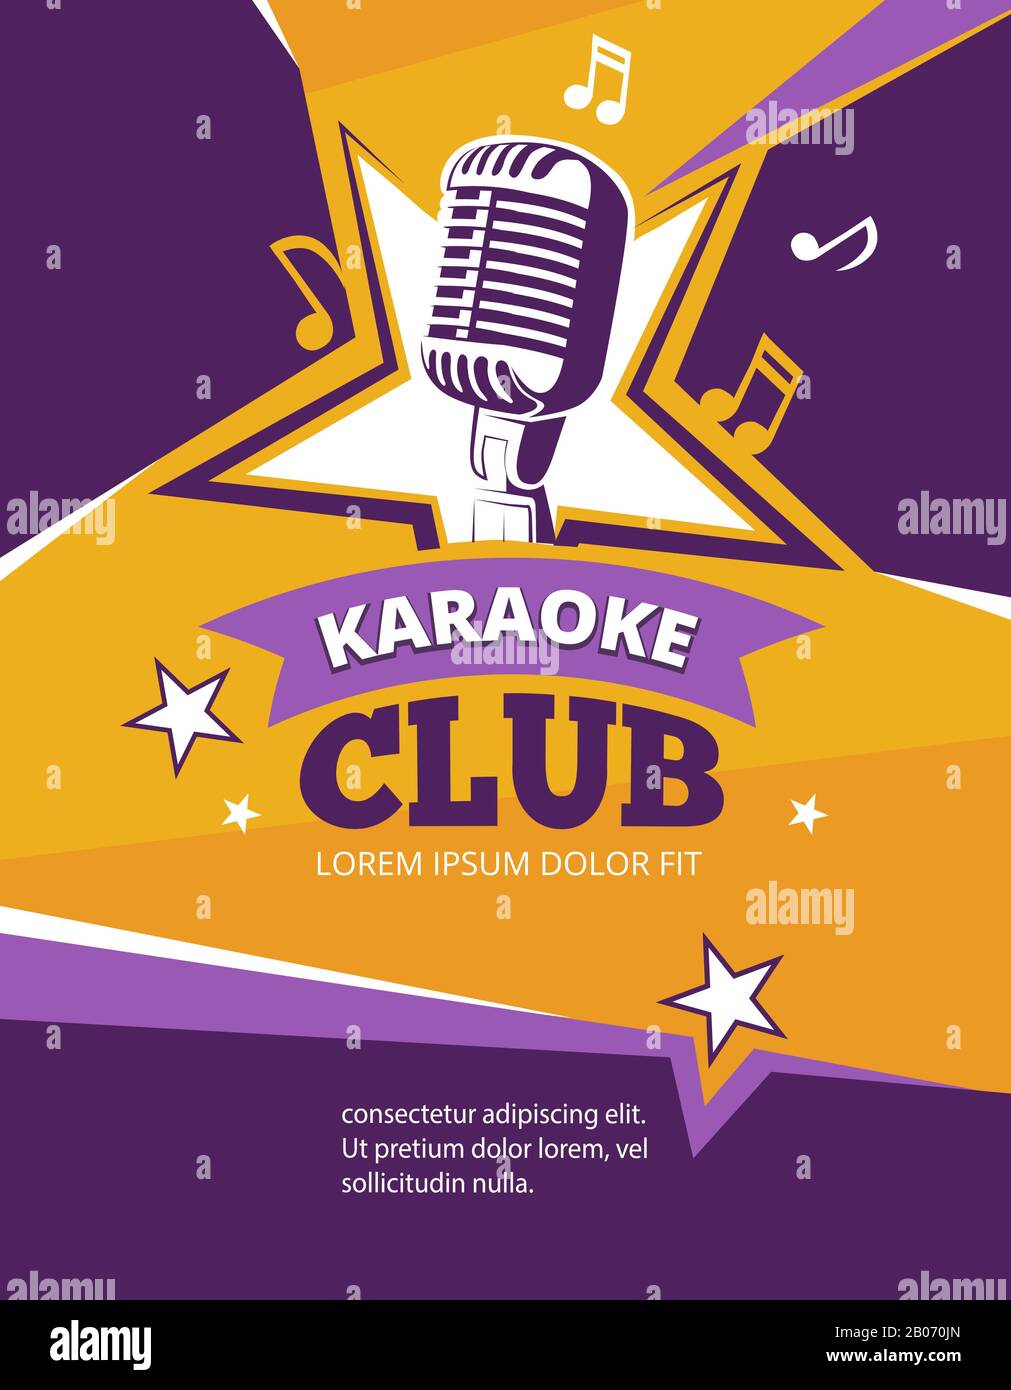 Karaoke party vector poster. Music karaoke club banner with retro microphone illustration Stock Vector